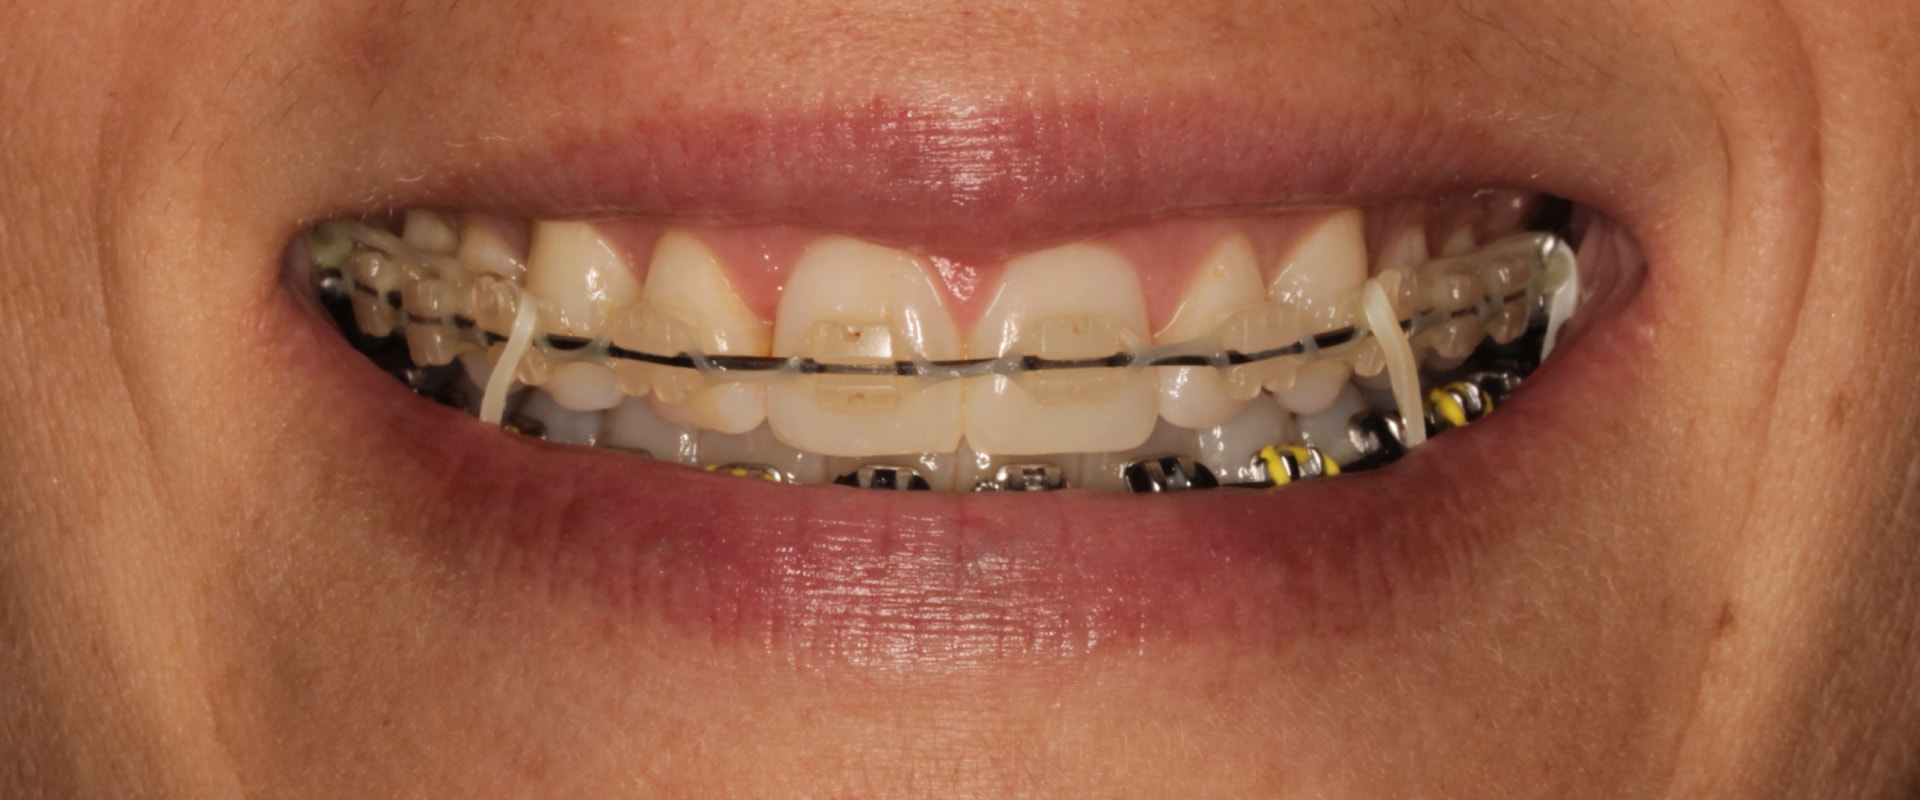 Why Do I Need Two Appointments for Braces? A Guide to Orthodontic Appointments